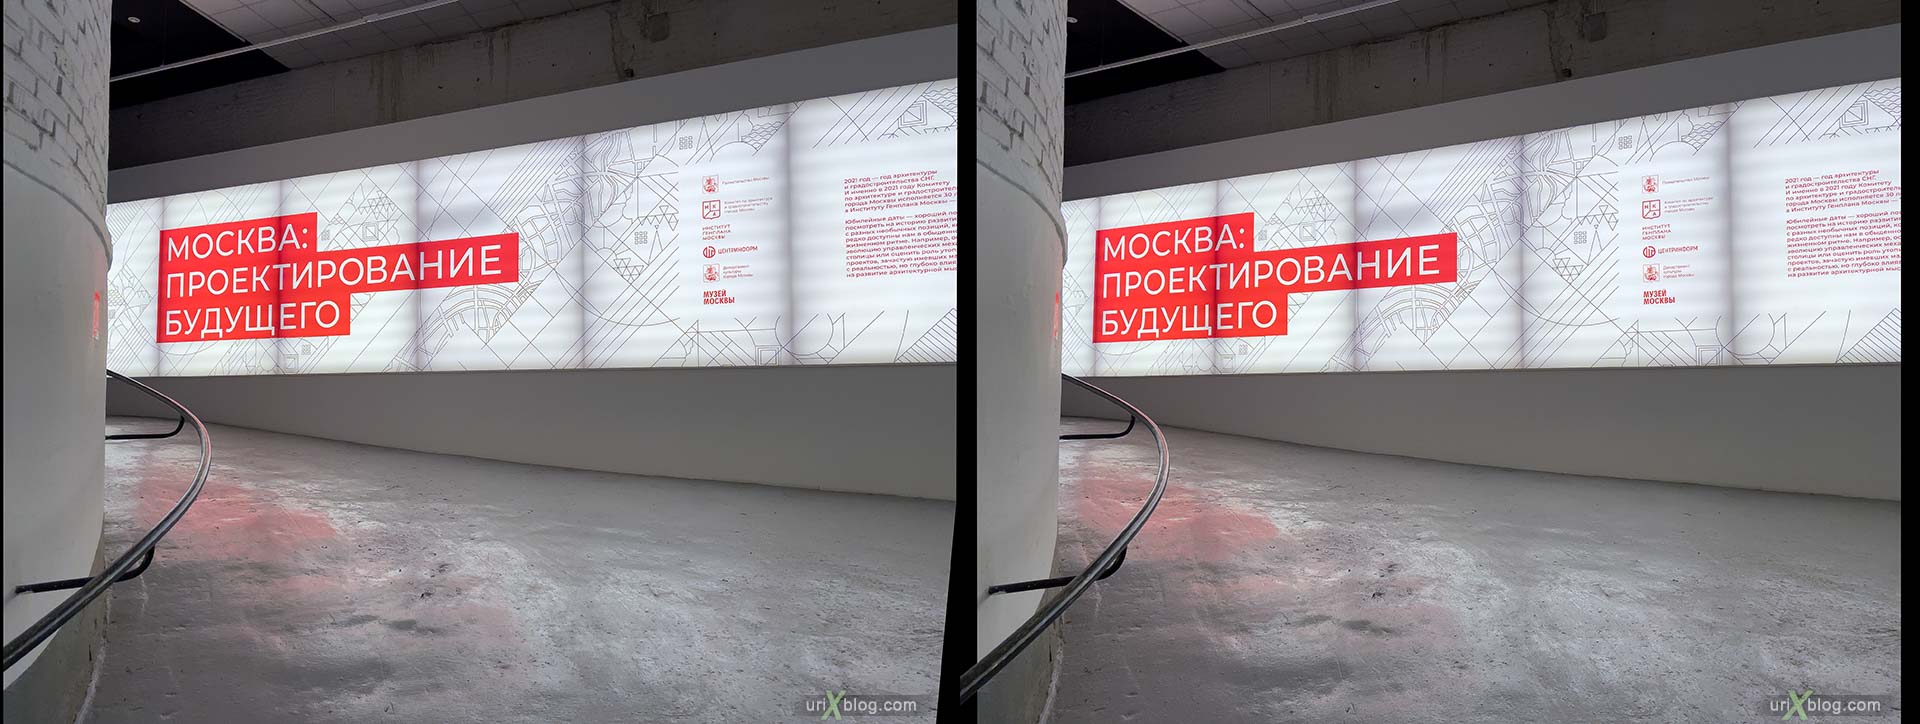 museum, exhibition, designing the future, Moscow, Russia, 3D, stereo pair, cross-eyed, crossview, cross view stereo pair, stereoscopic